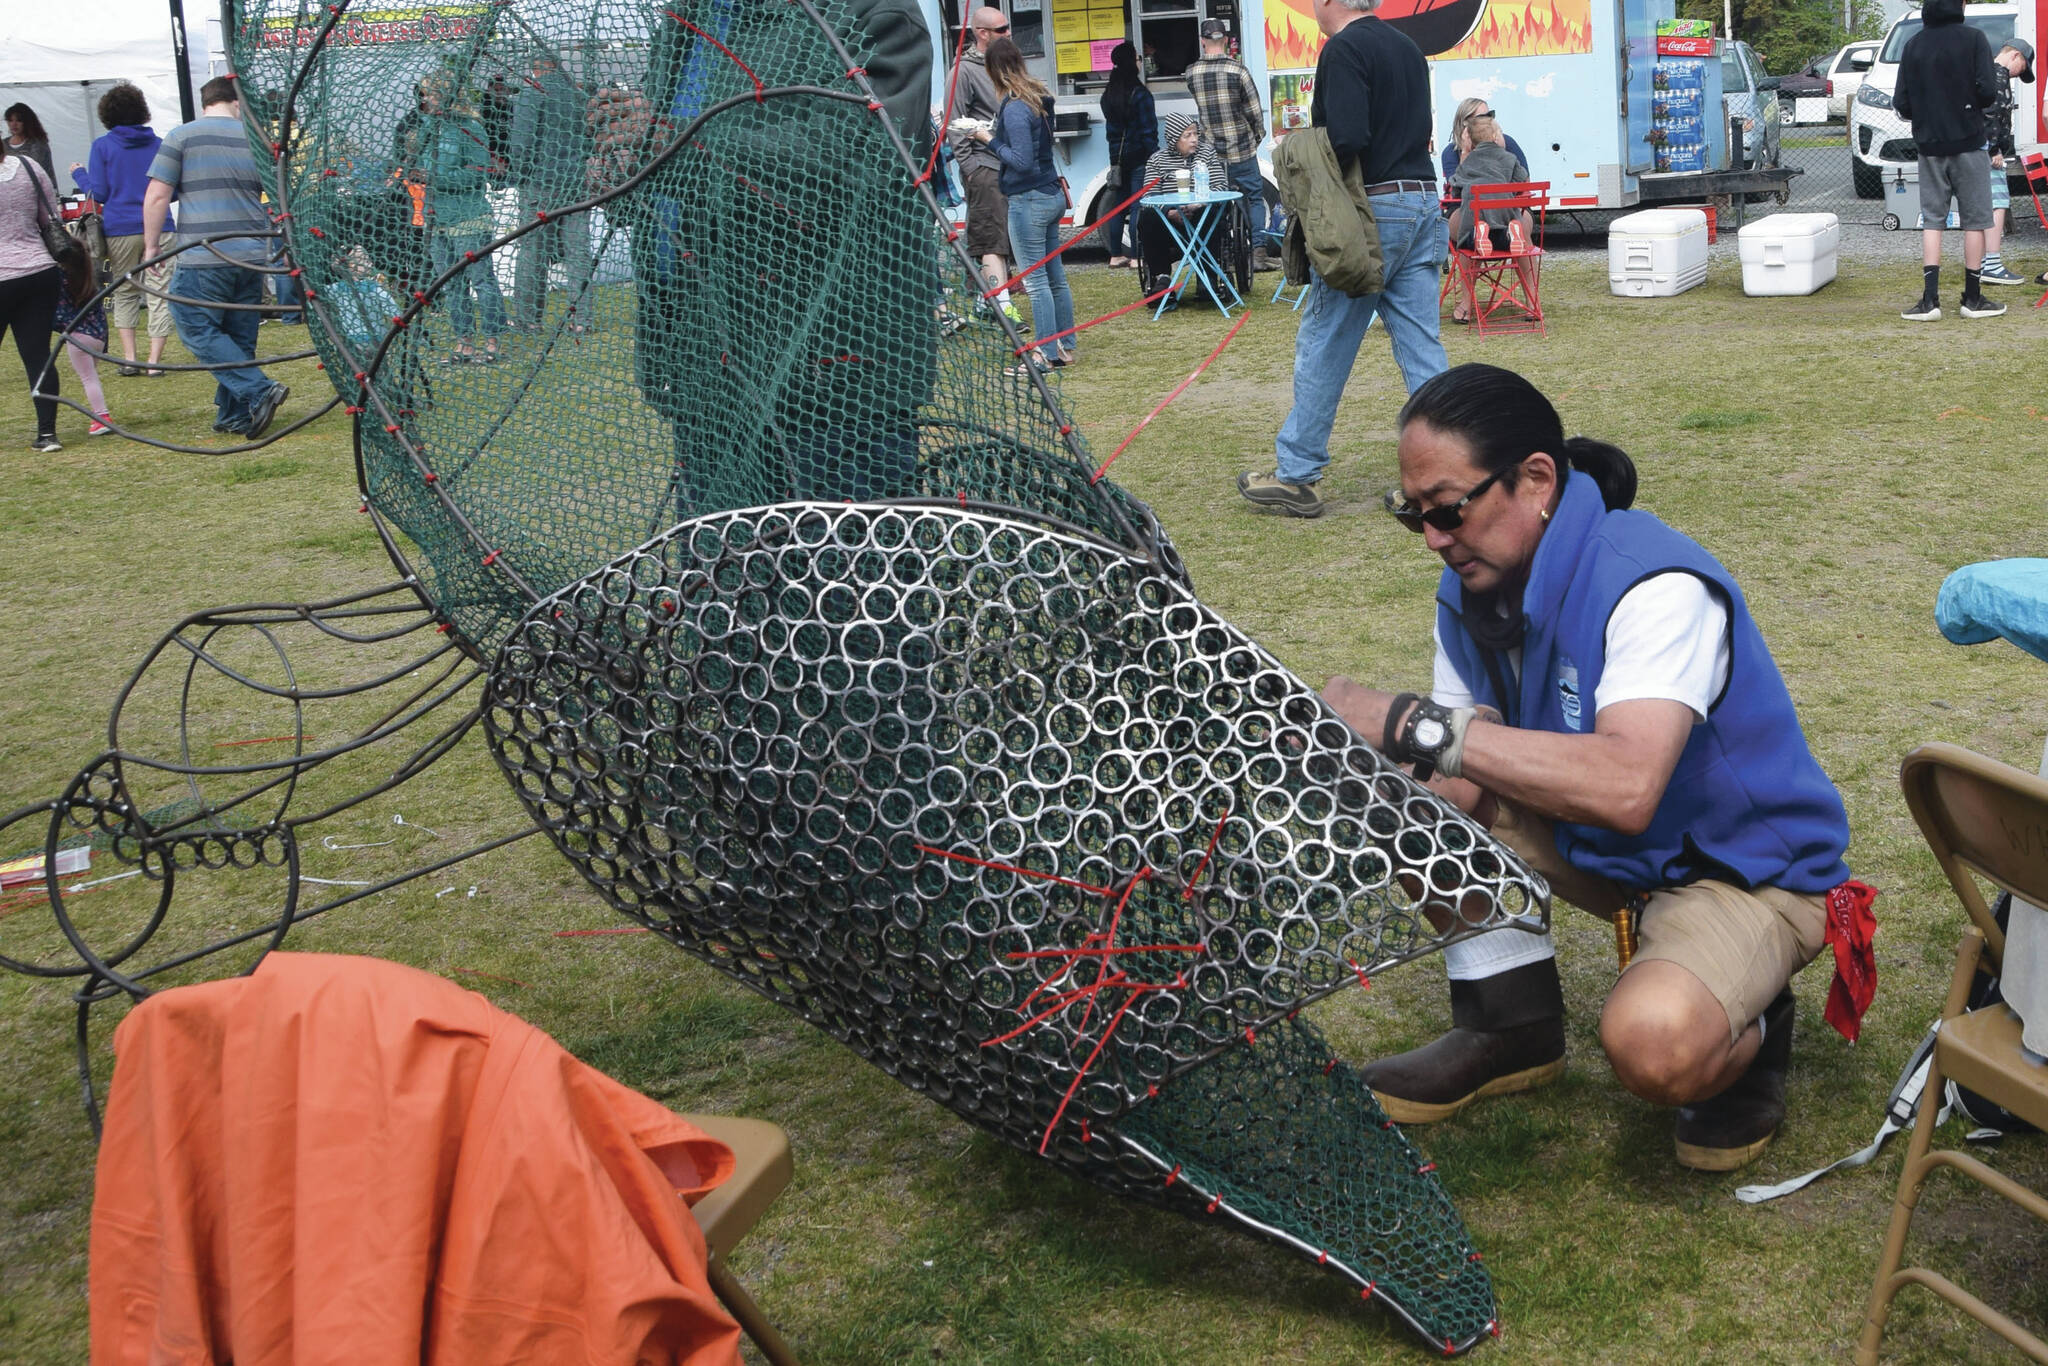 Cam Choy, associate professor of art at Kenai Peninsula College, works on a salmon sculpture in collaboration with the Kenai Watershed Forum during the Kenai River Festival at Soldotna Creek Park in Soldotna, Alaska, on June 8, 2019. (Peninsula Clarion file)